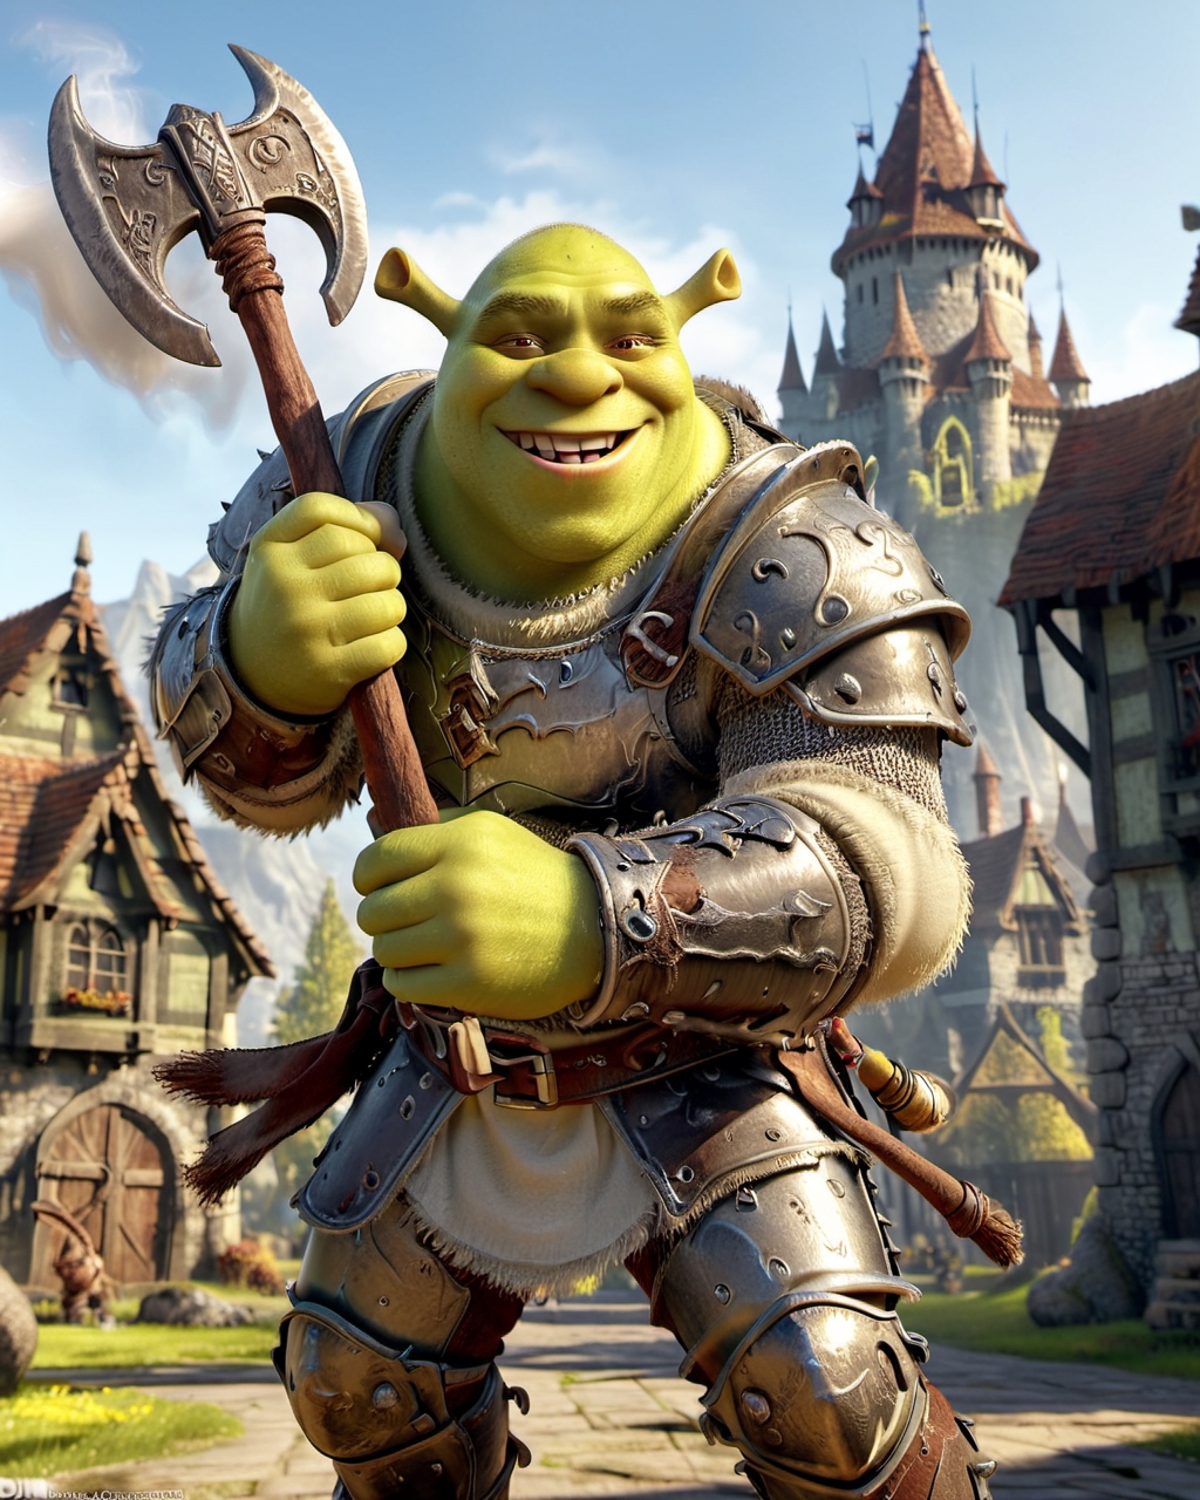 Shrek the Dragon in a medieval setting holding a sword.